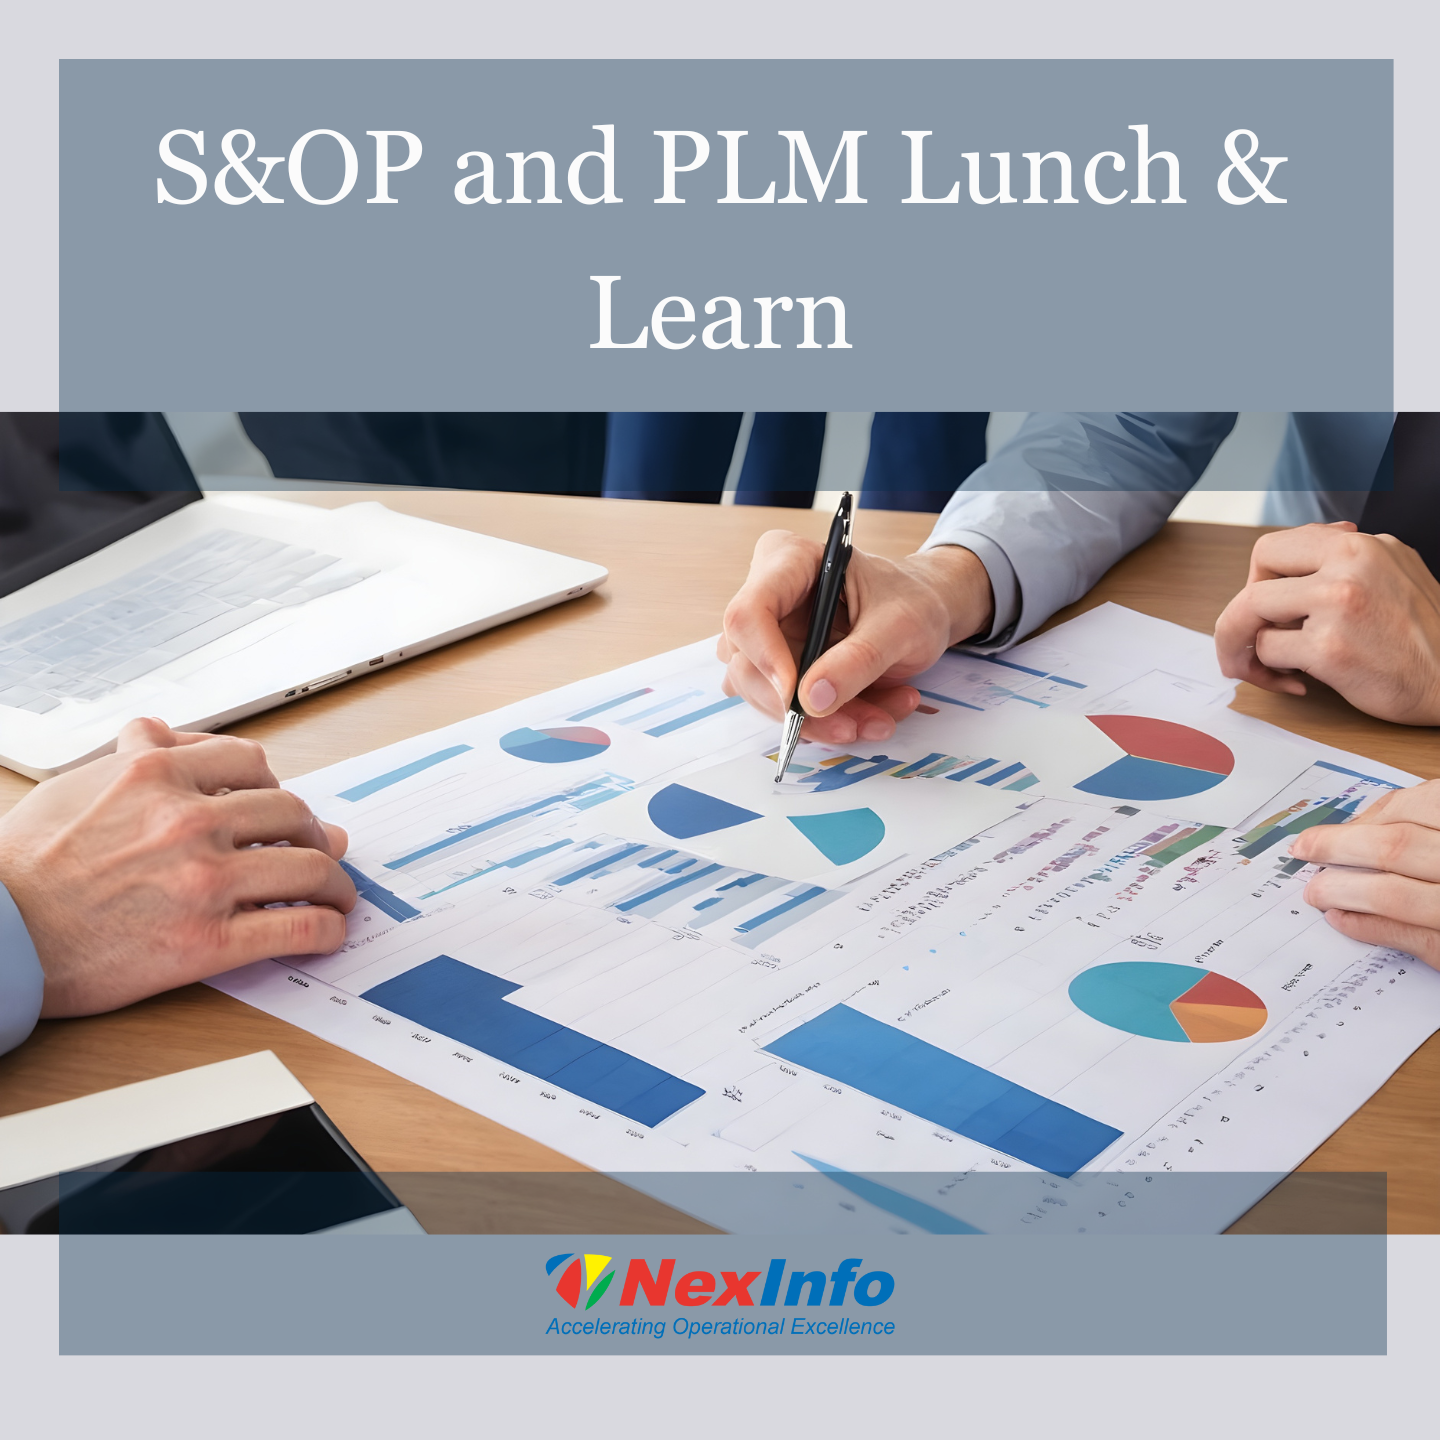 S&OP and PLM Lunch & Learn